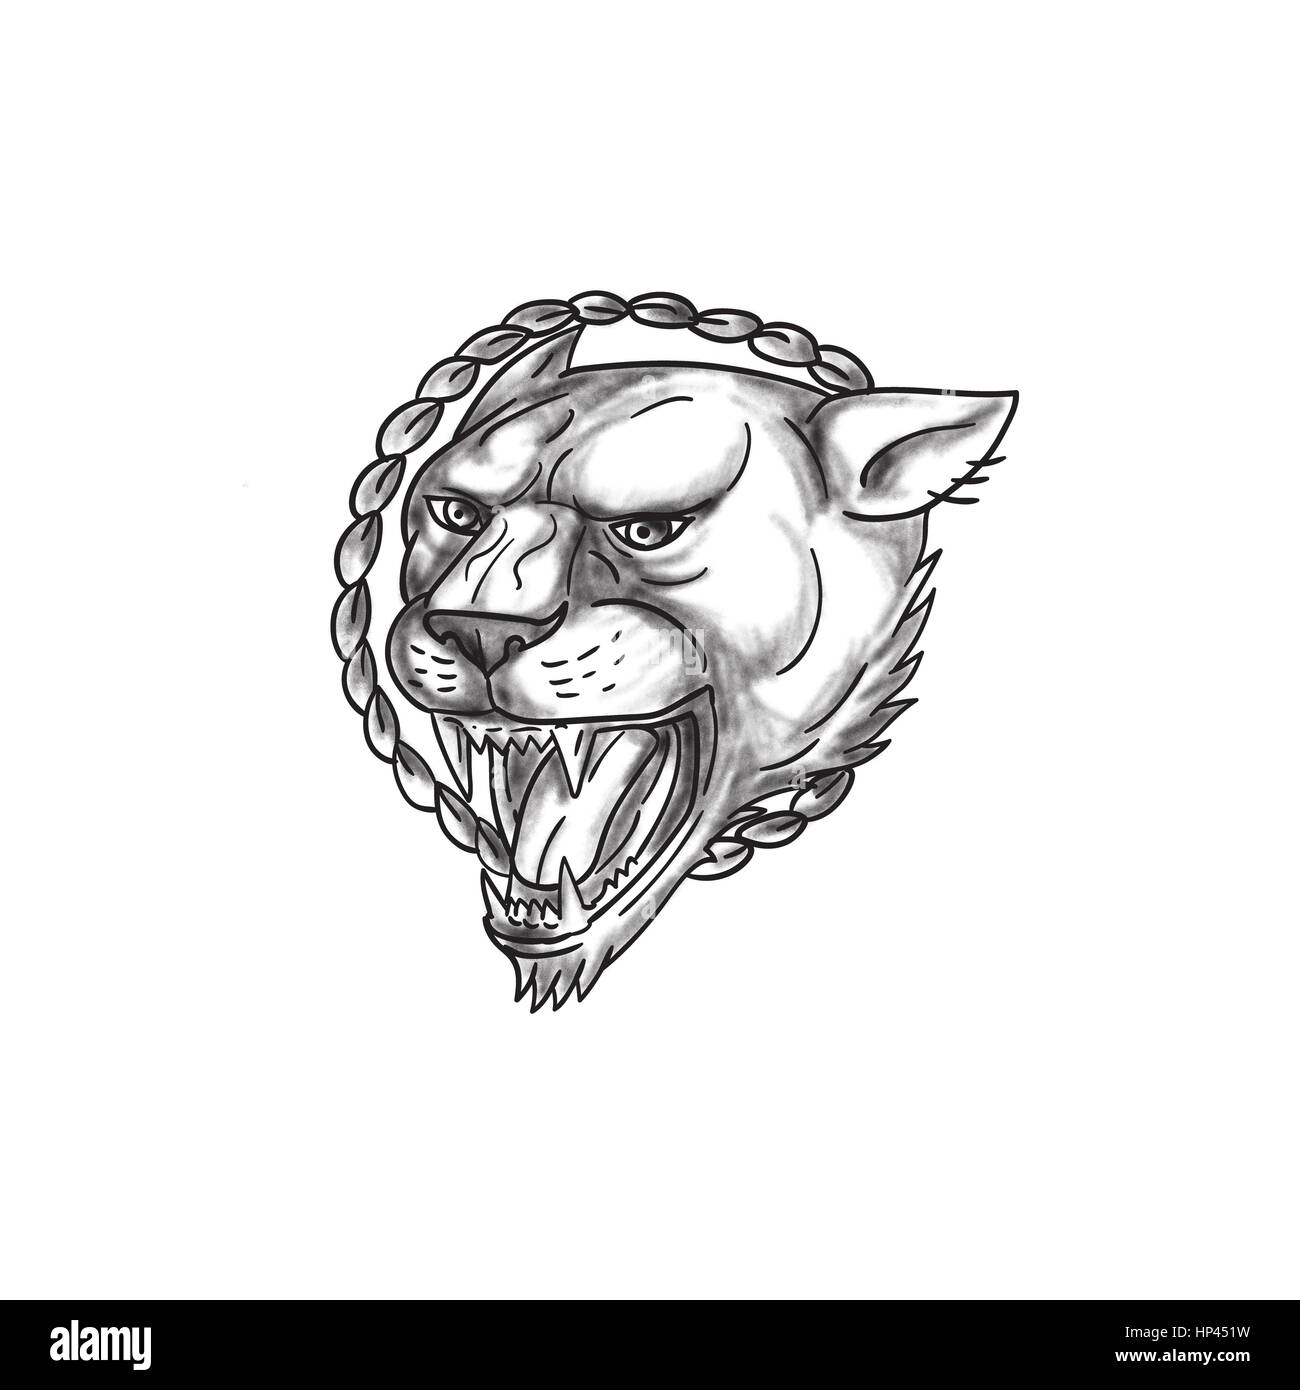 Tattoo style illustration of a lioness growling with rope in the background set on isolated white background. Stock Photo